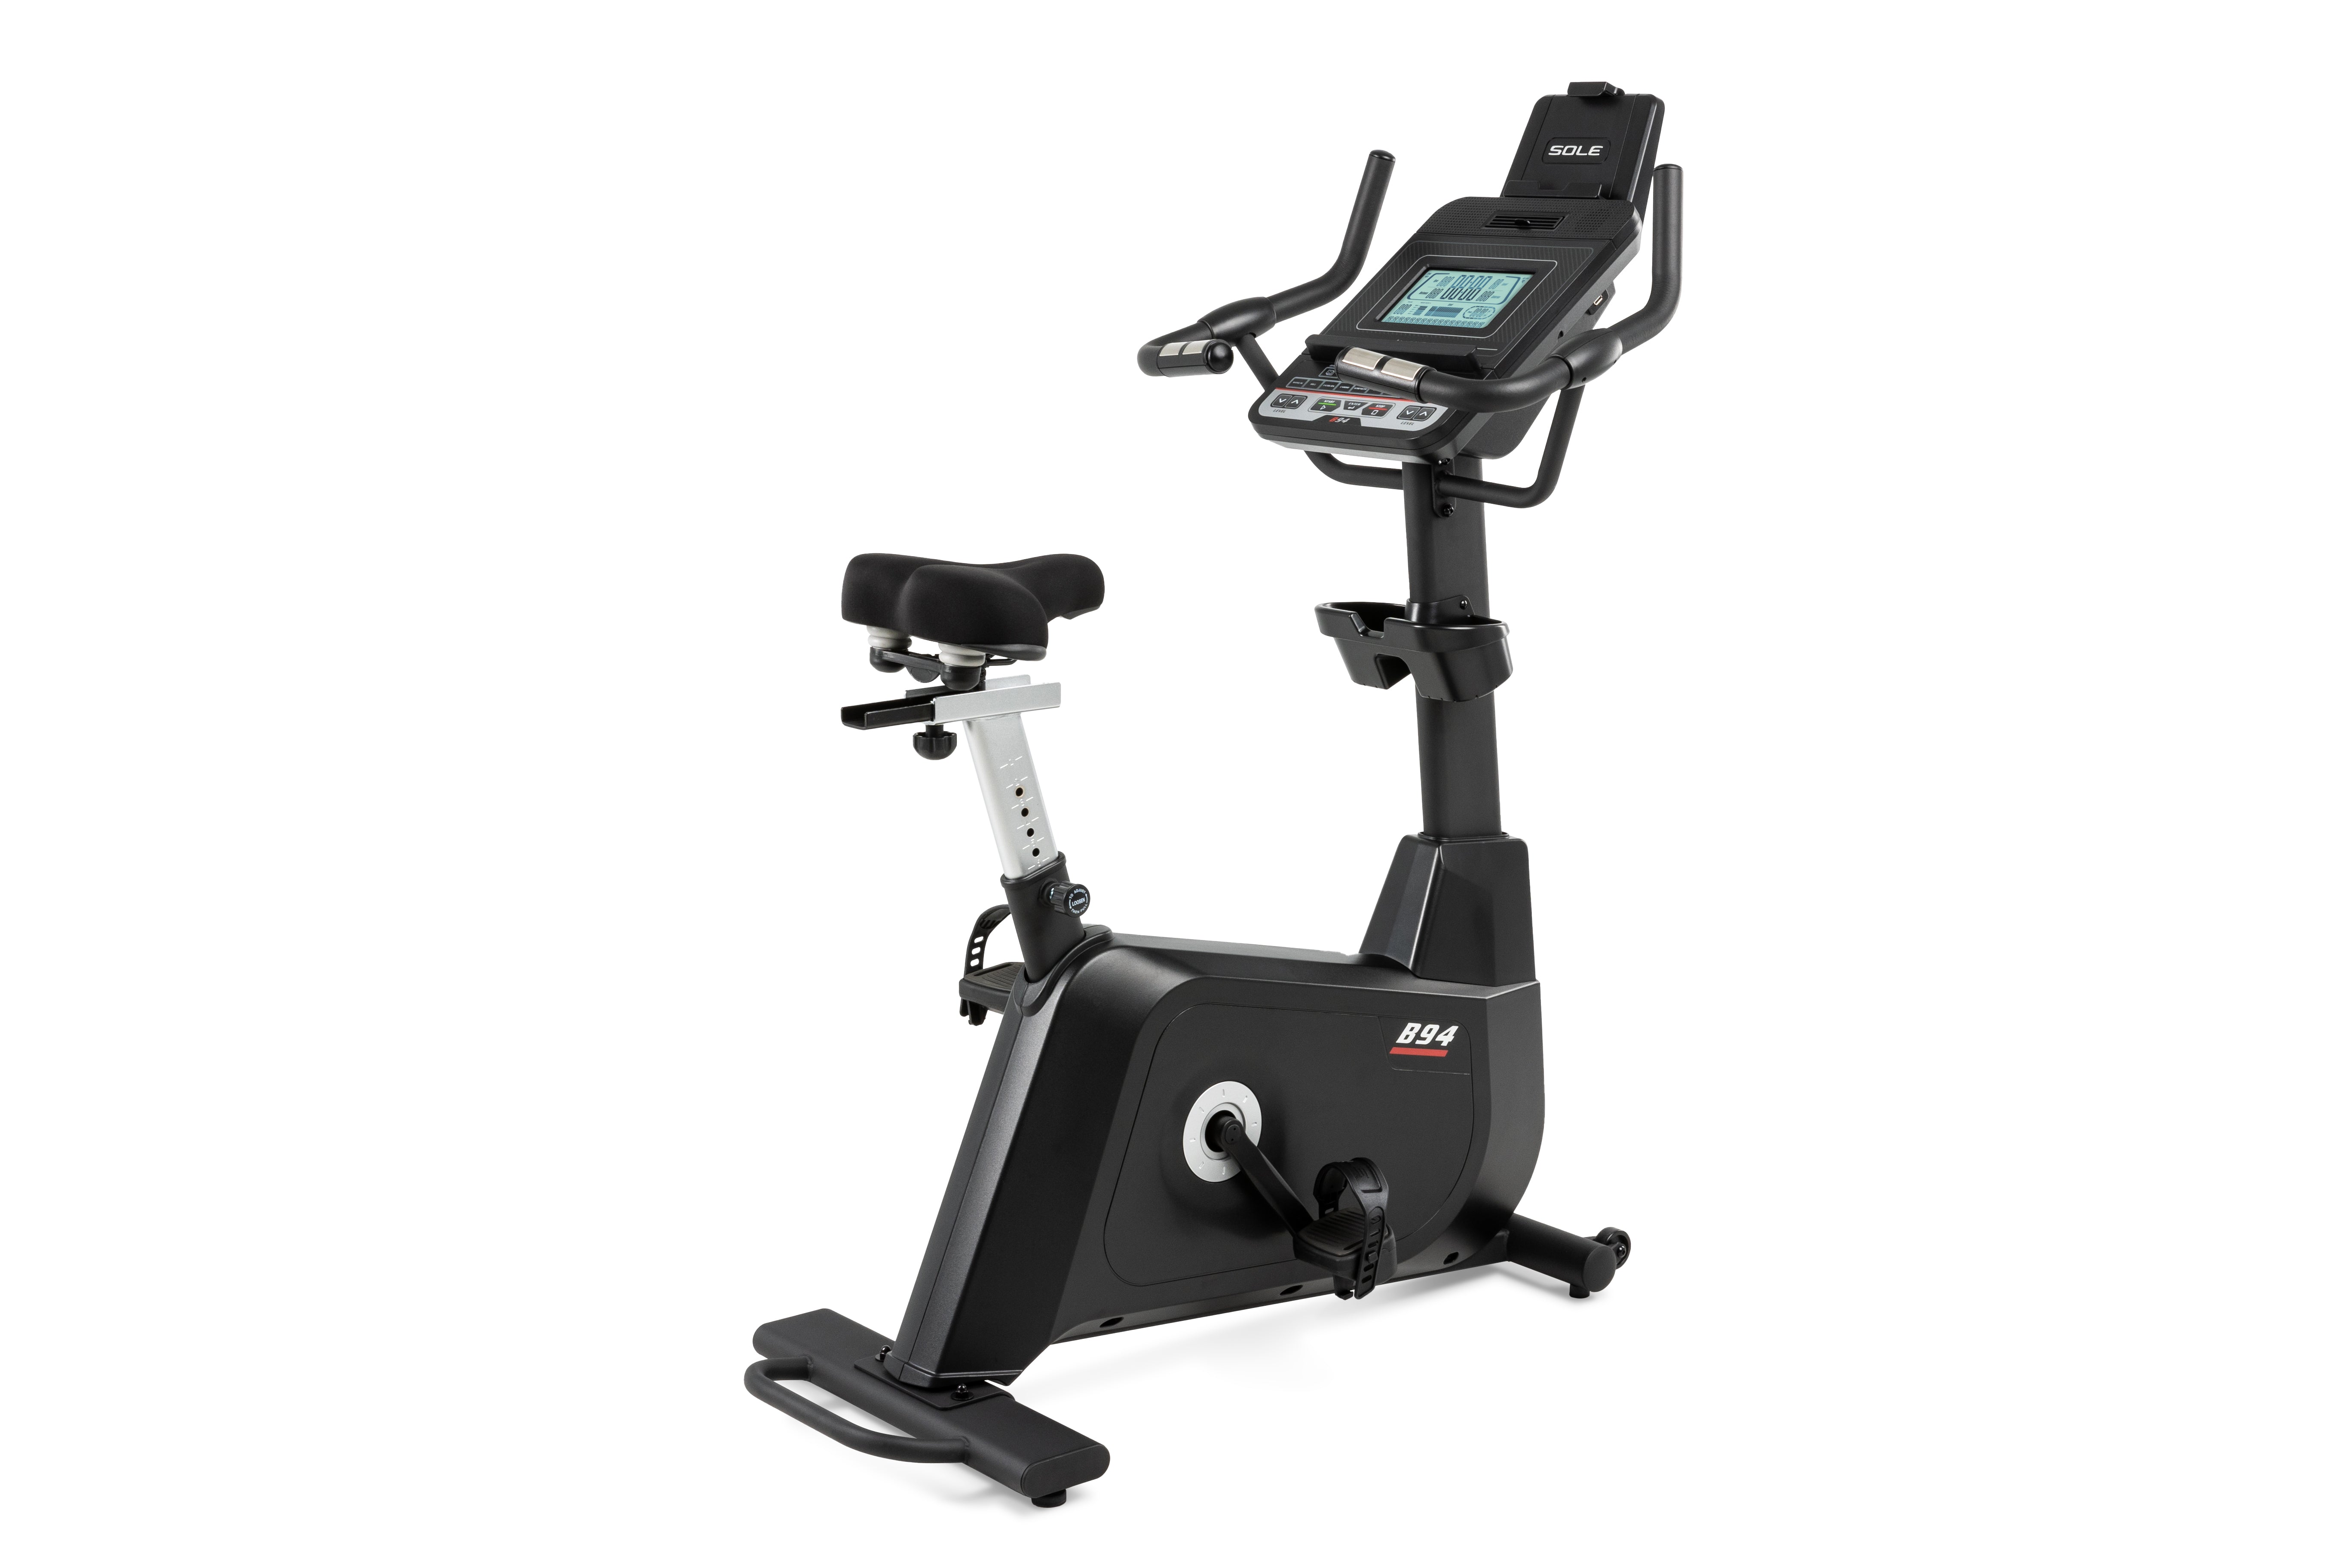 Sole B94 upright exercise bike with digital console and adjustable seat.